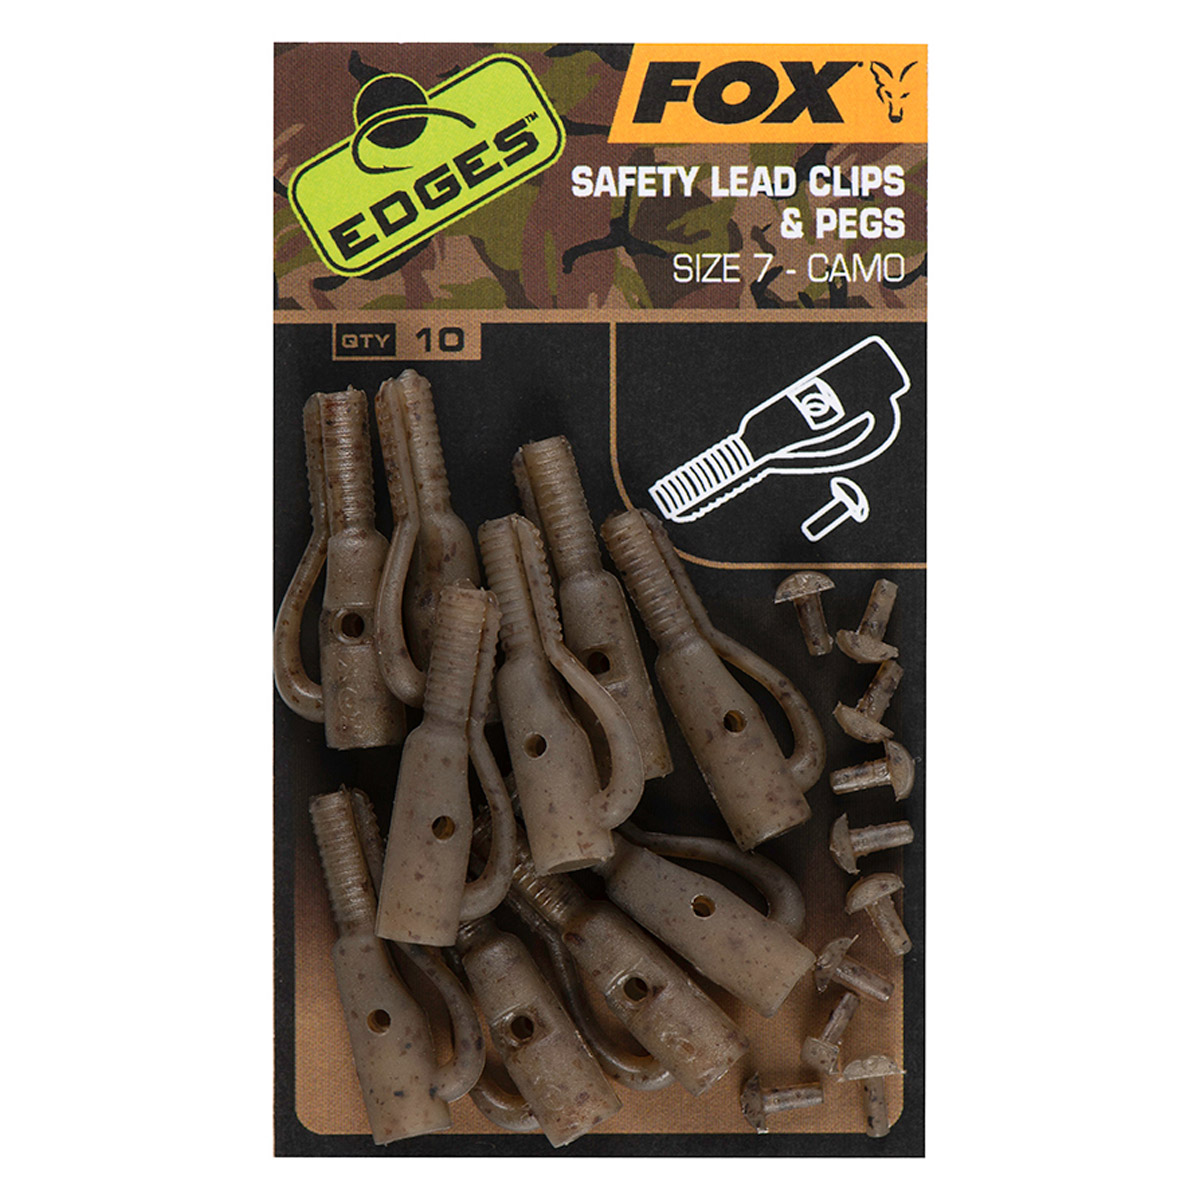 Fox Edges Safety Lead Clips & Pegs Size 7